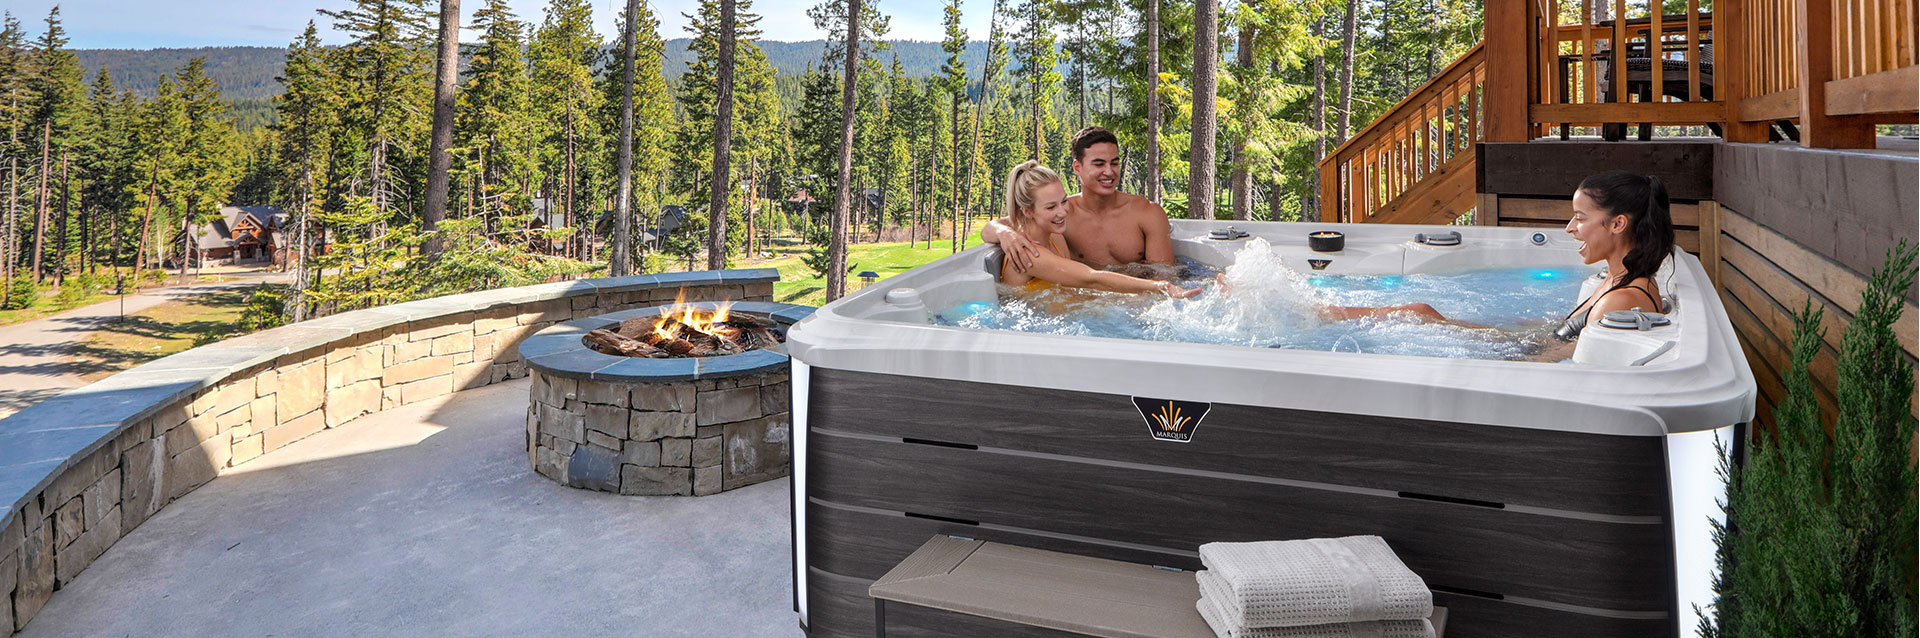 beauty image showing 7 person hot tubs